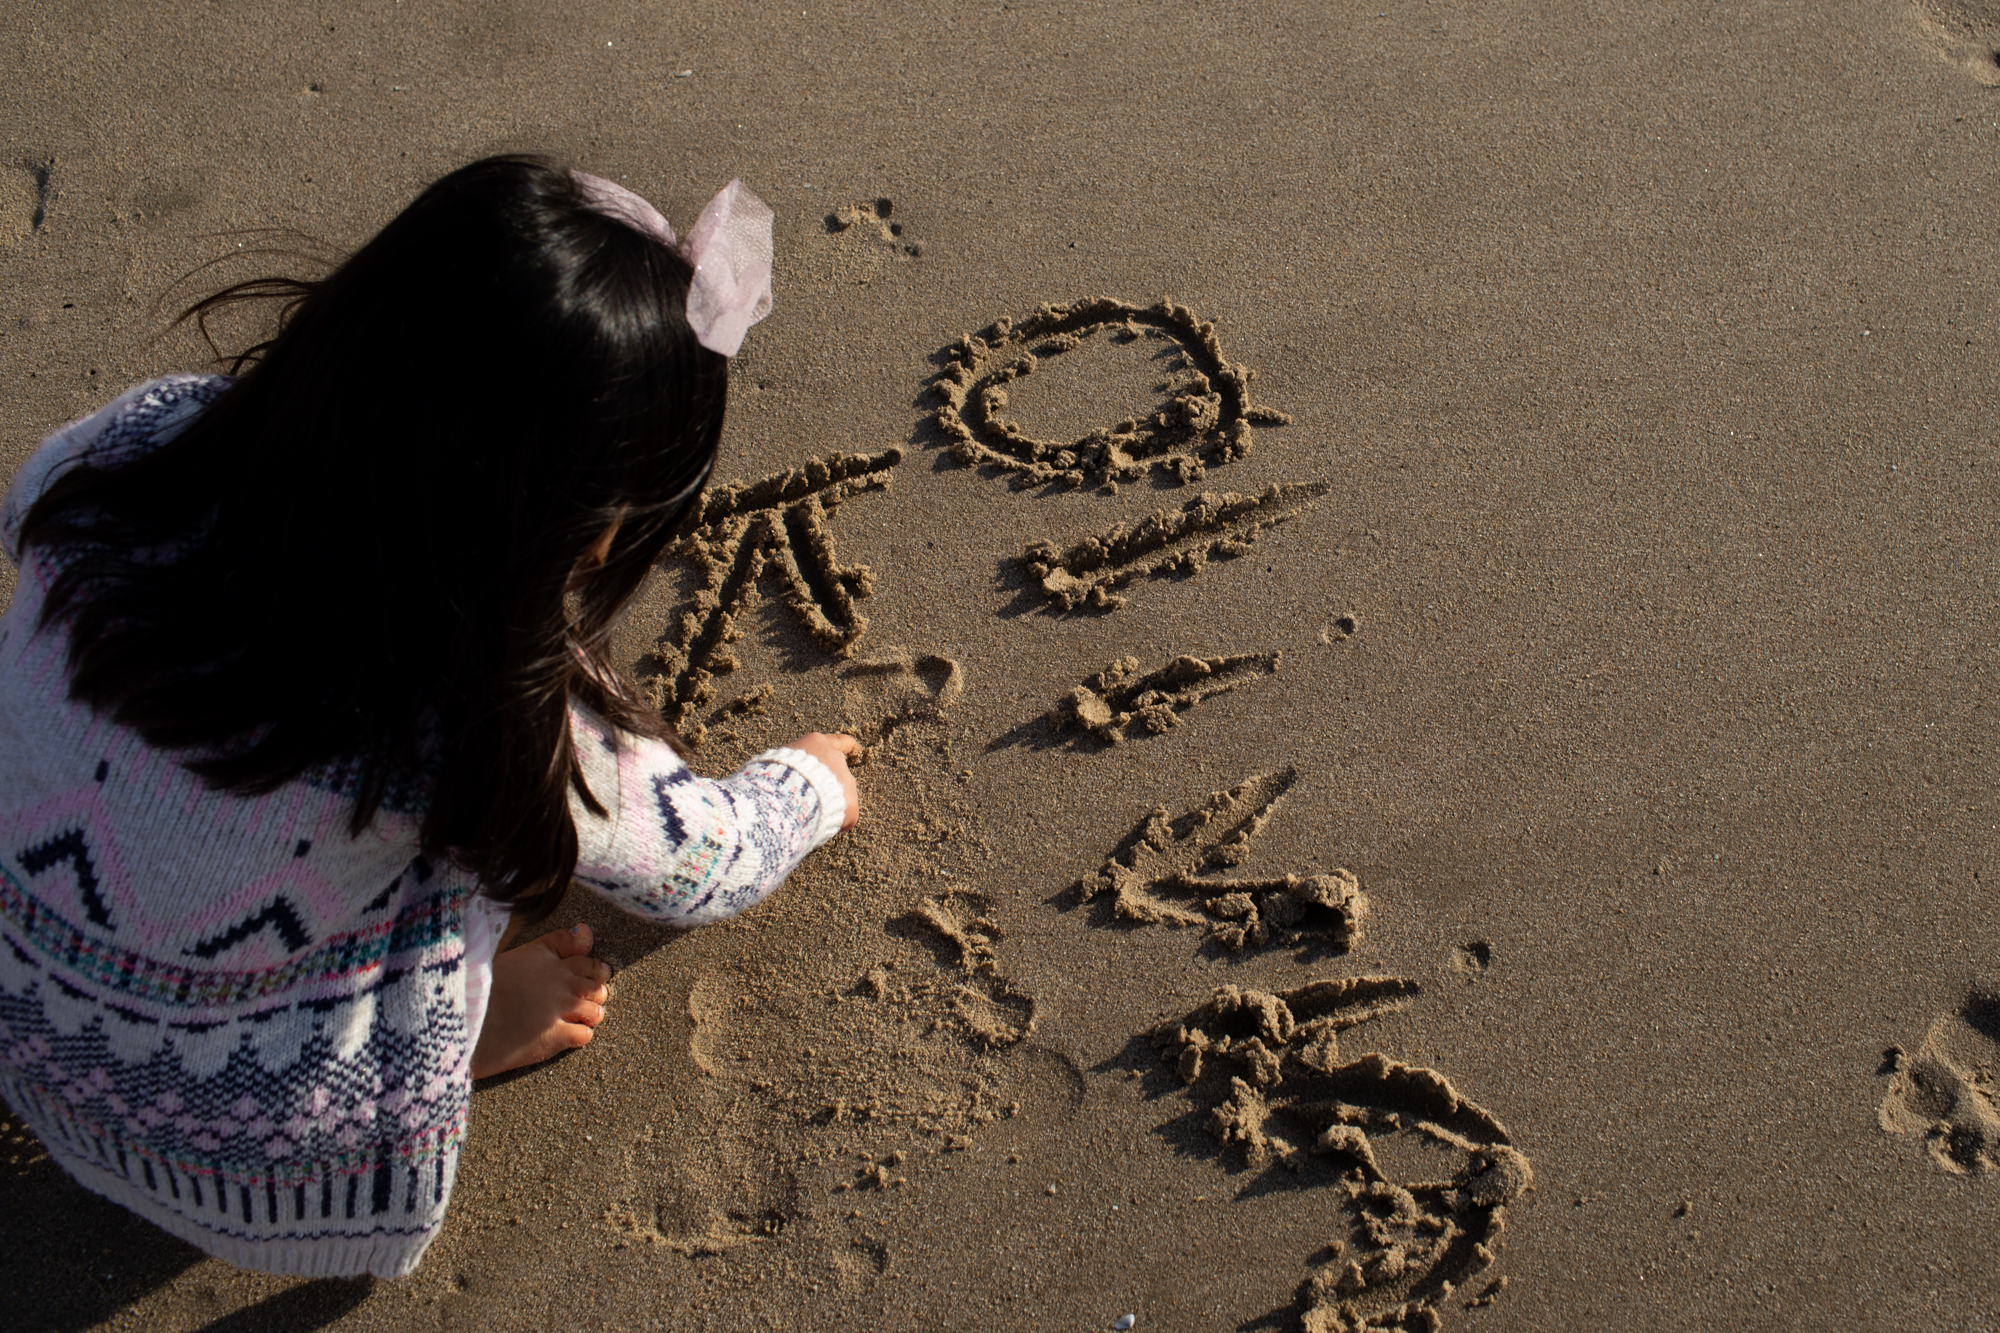 Los Angeles child drawing in sand at beach